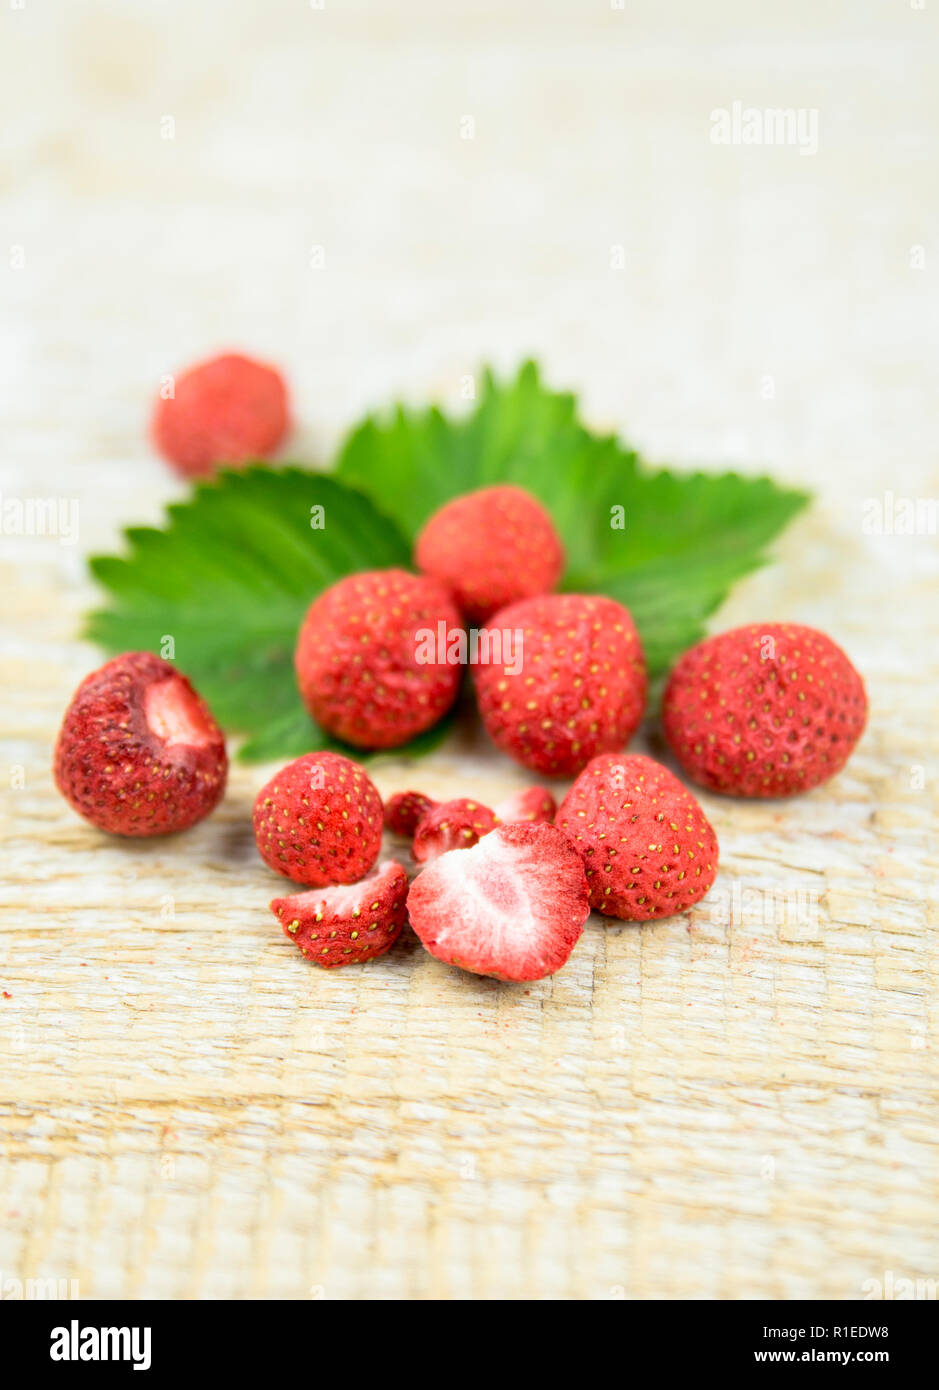 Freeze dried whole and pieces of strawberries on green strawberry leaf, healthy snack full of vitamins and nutrition on natural wooden background. Stock Photo